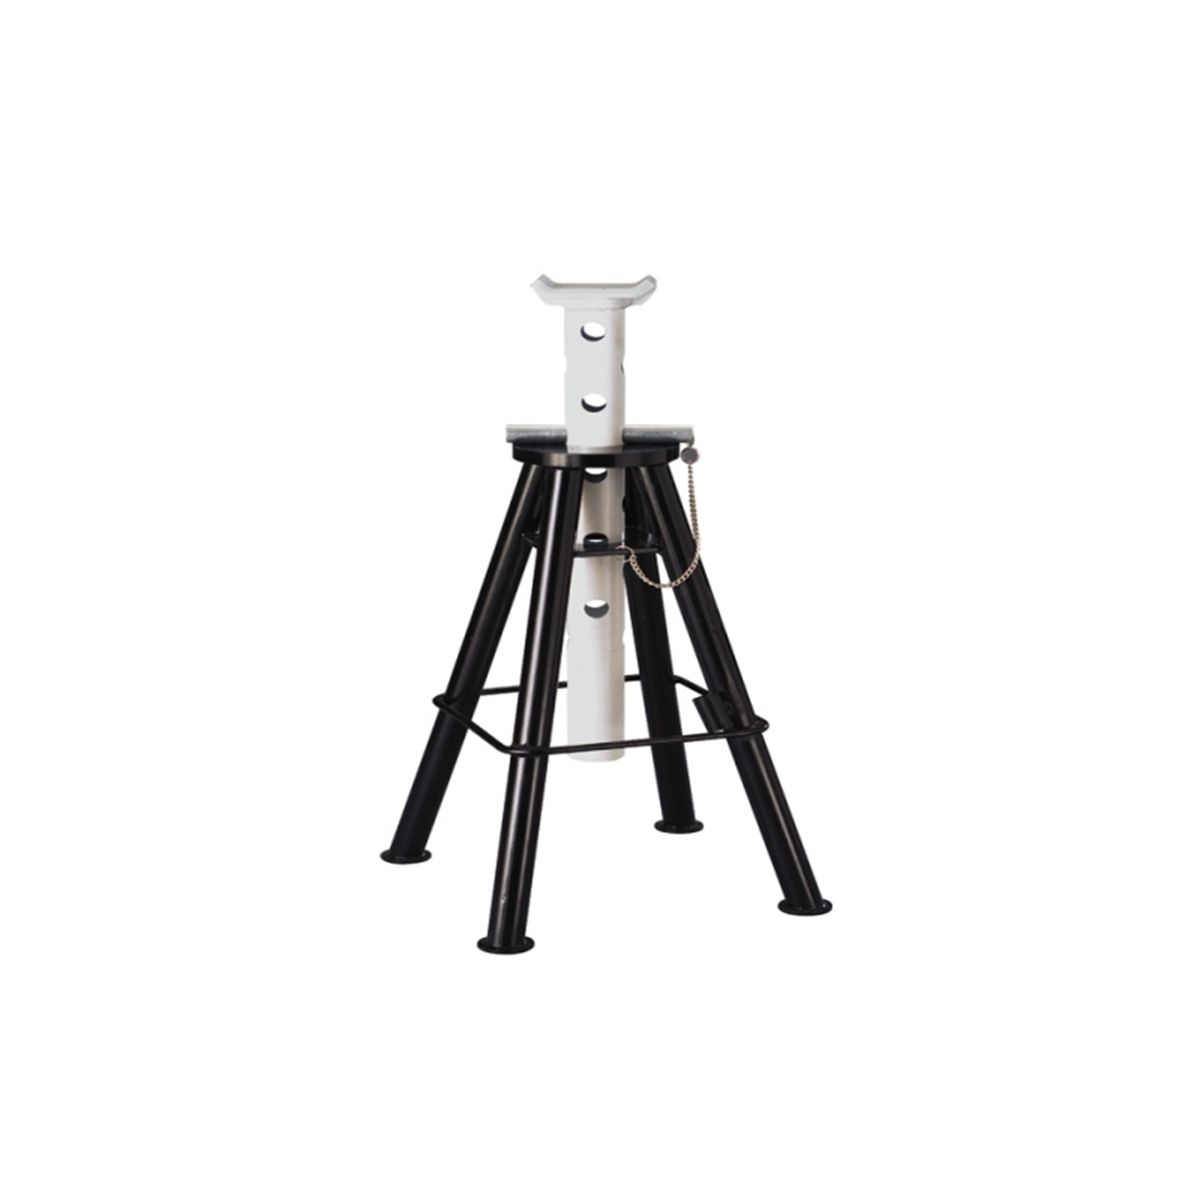 Medium Height Pin Style Jack Stands - 10 Ton - Pair